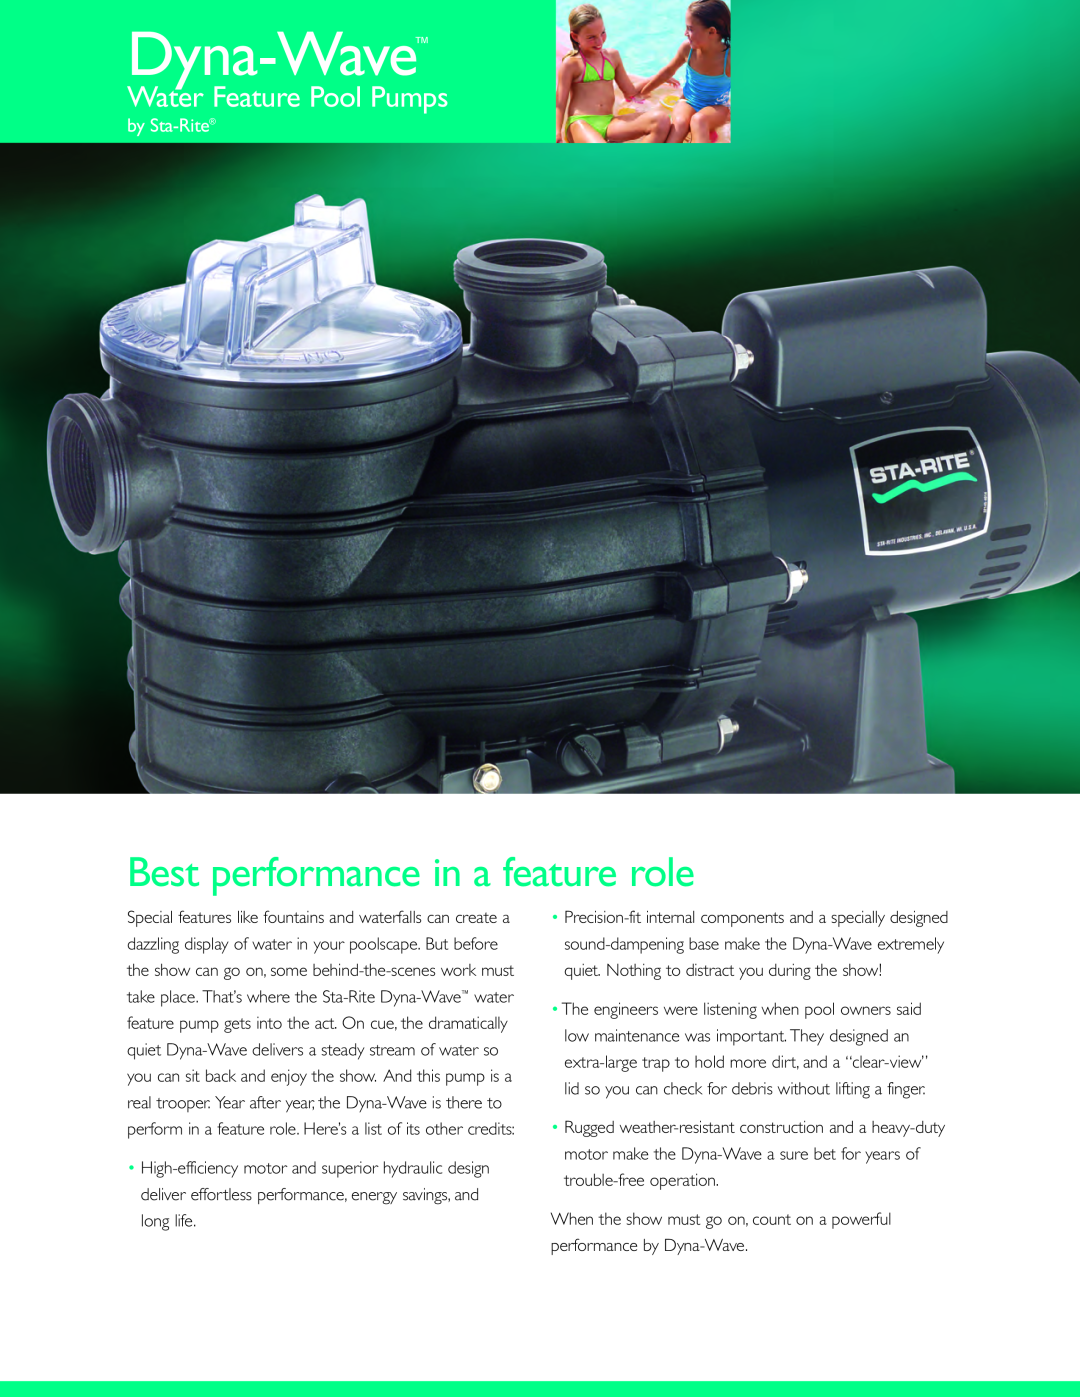 Pentair Dyna-Wave manual Best performance in a feature role, Water Feature Pool Pumps, by Sta-Rite 